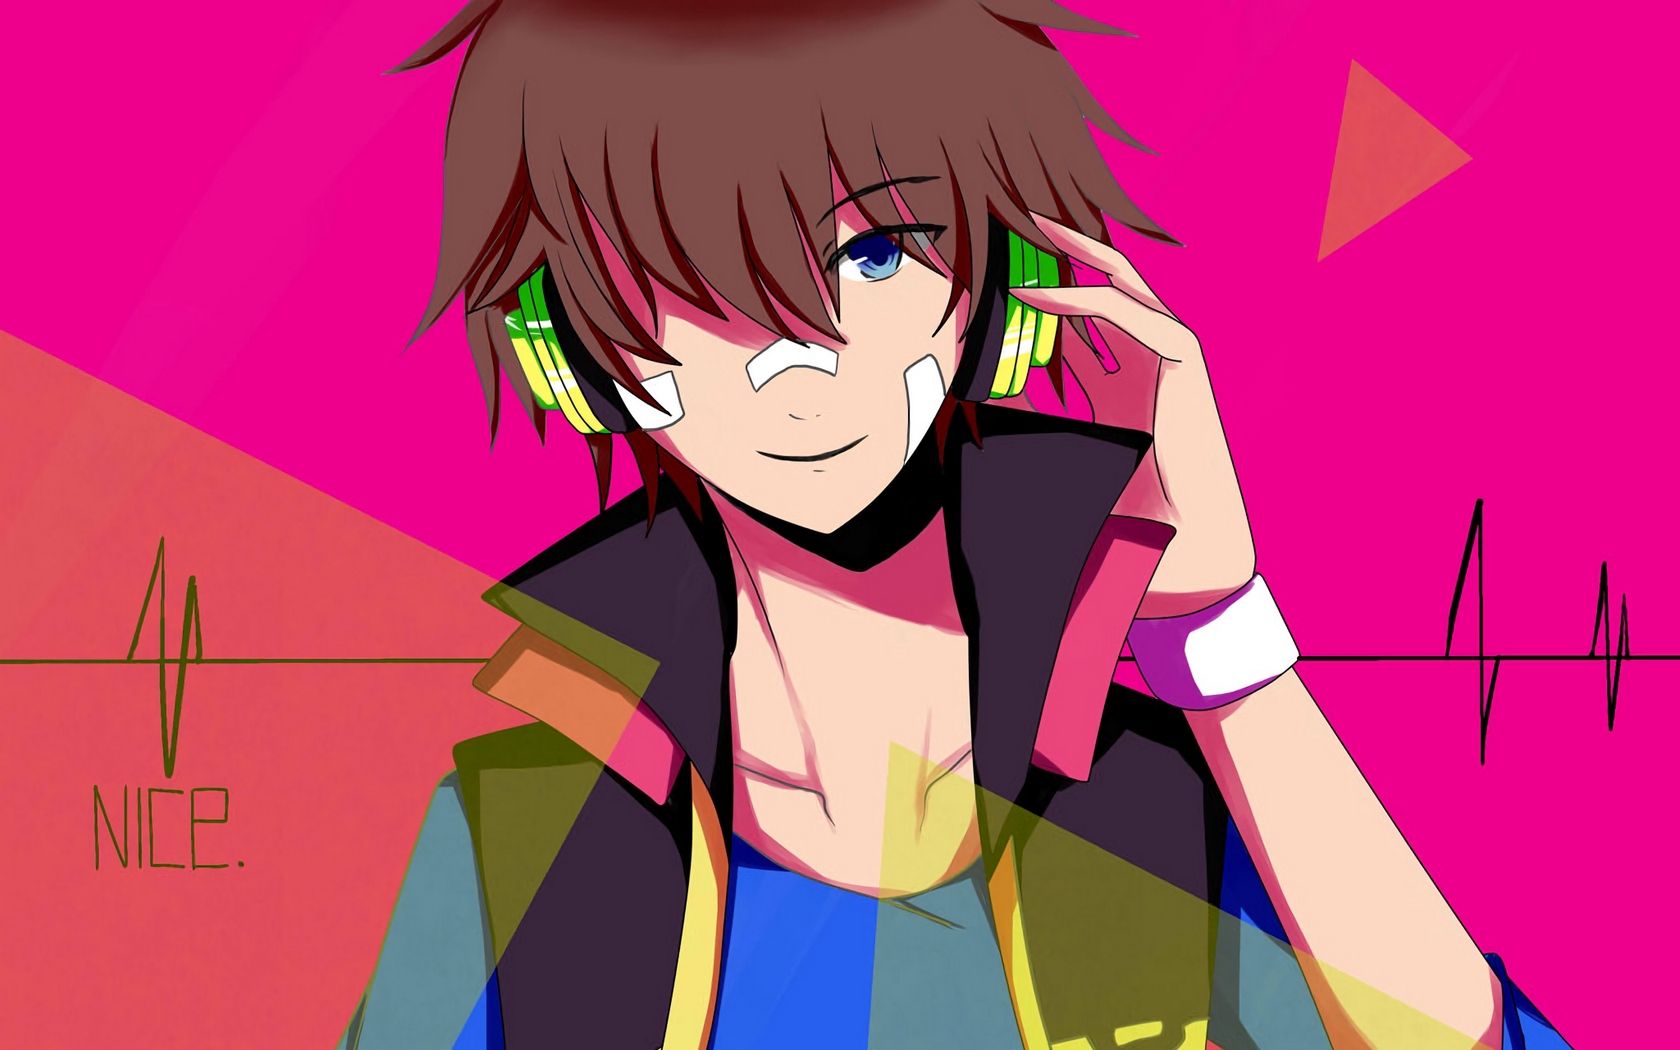 Music Anime Boy With Headphones Wallpapers - Wallpaper Cave